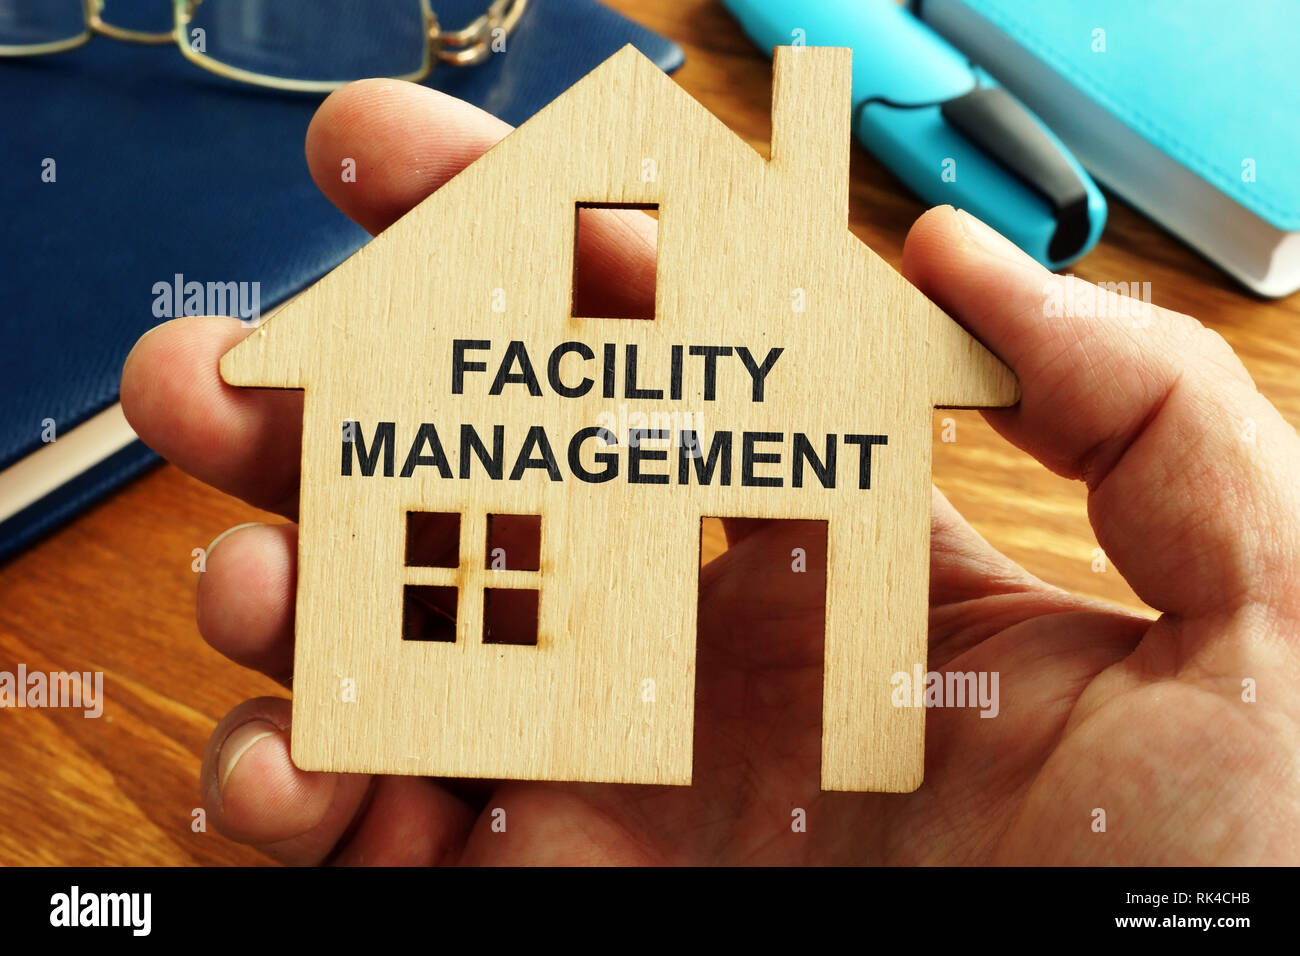 Facility management written on the small house. Stock Photo